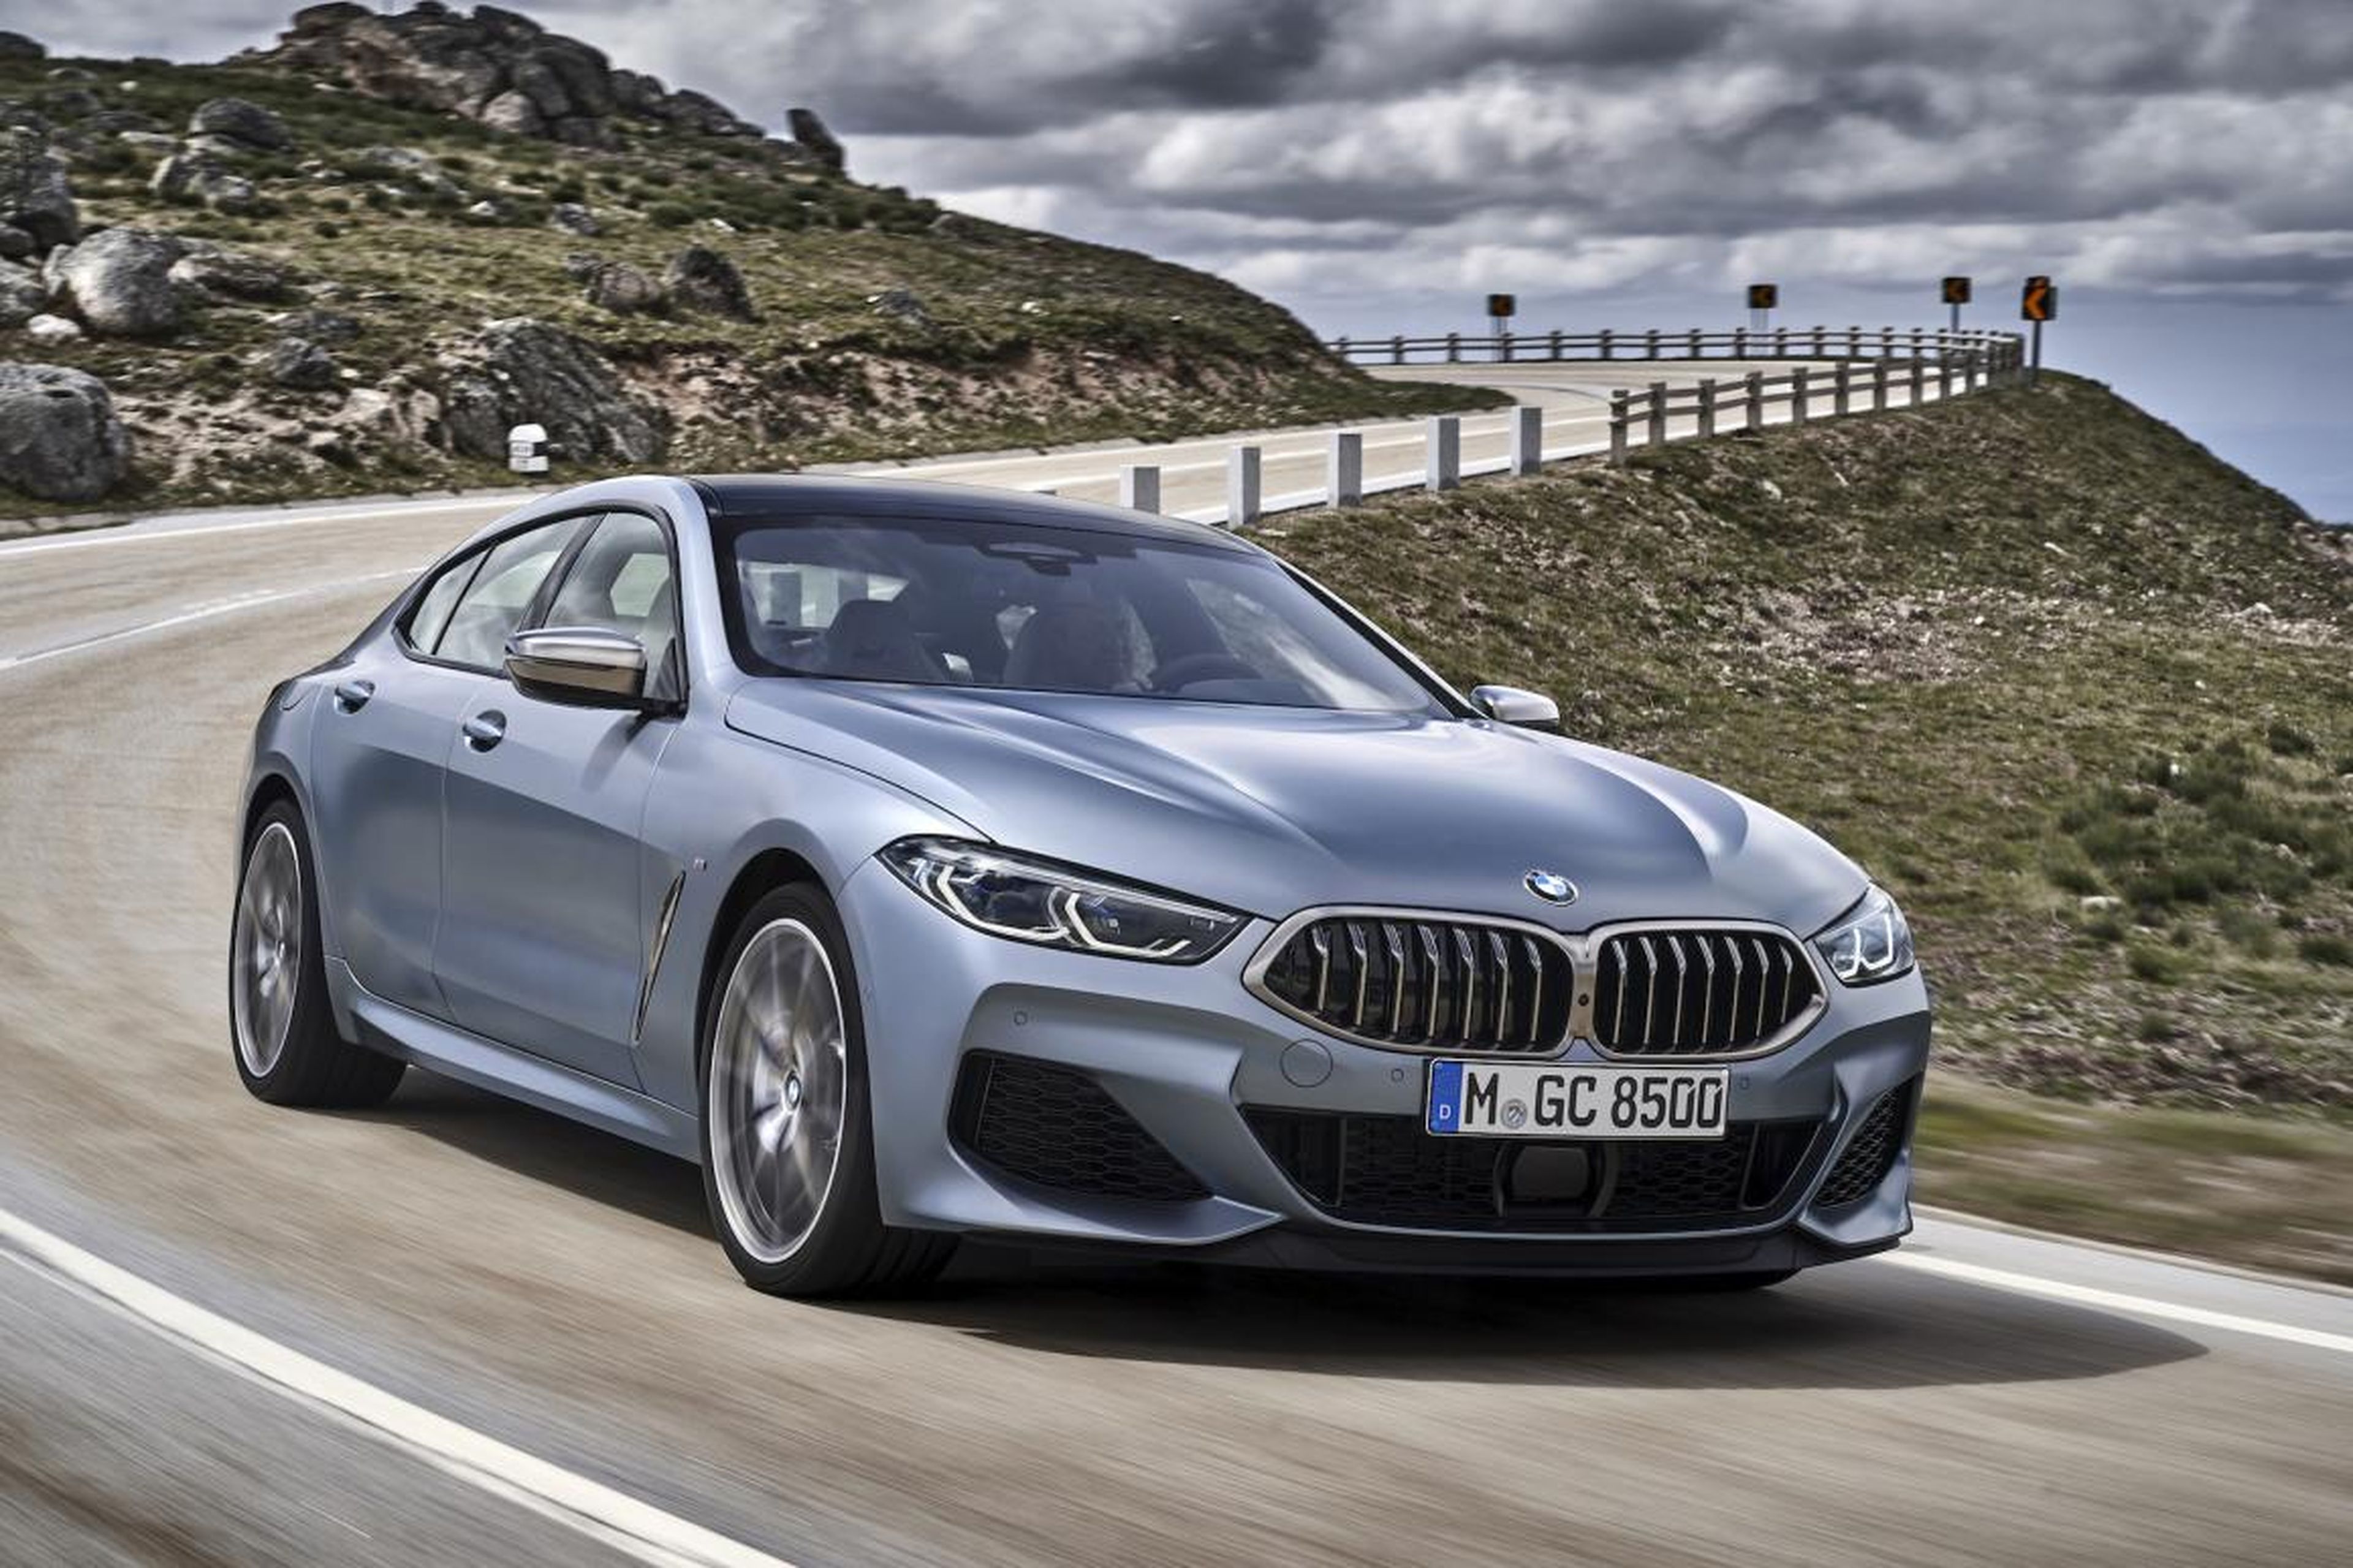 The BMW 8 Series Gran Coupé, a sleek and powerful sedan from the Bavarians, was also in Frankfurt.